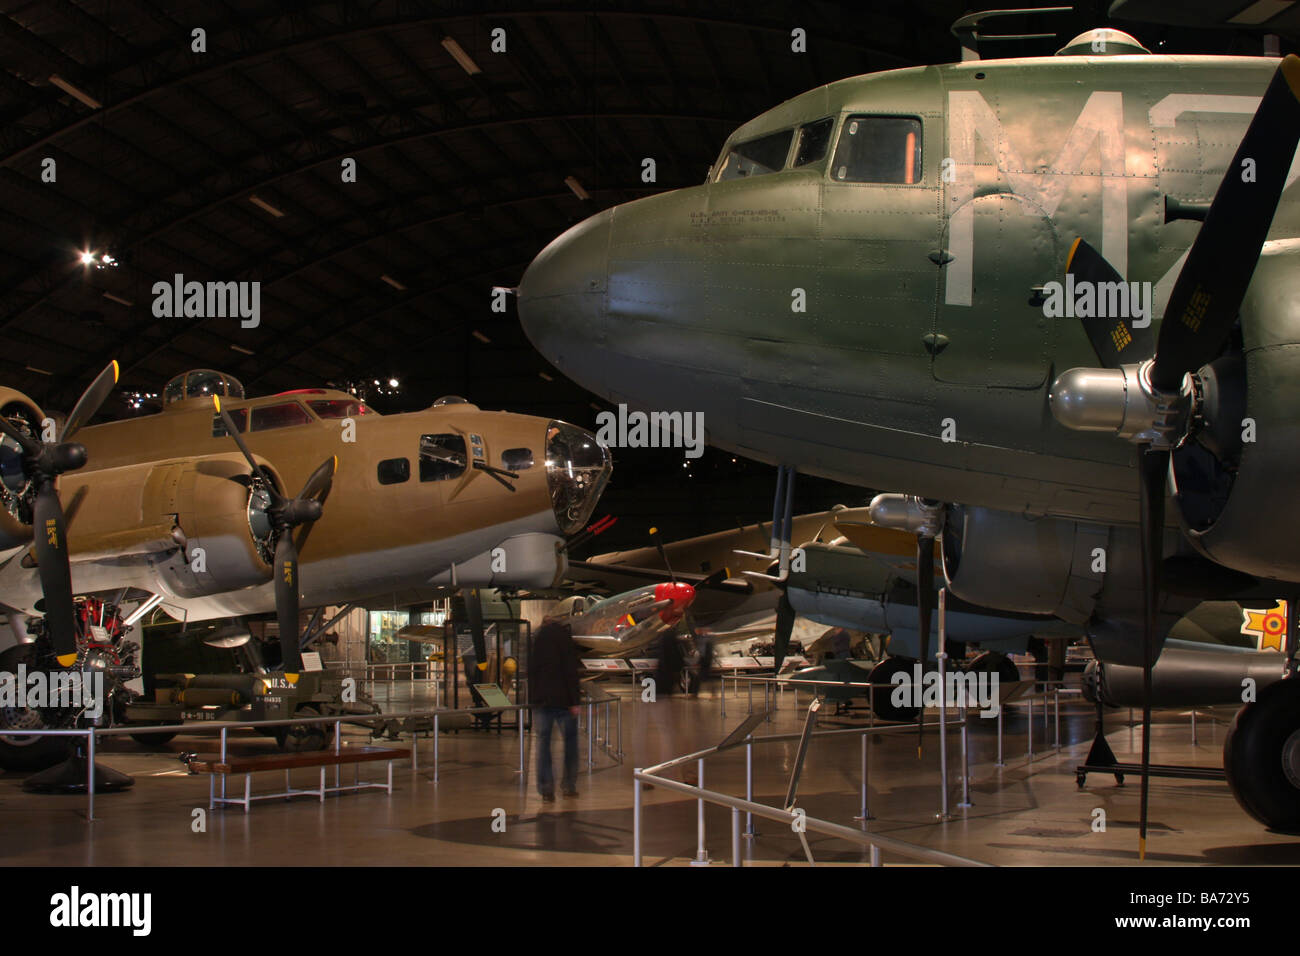 United States Air Force Museum Dayton, Ohio Wright Patterson air base Foto Stock